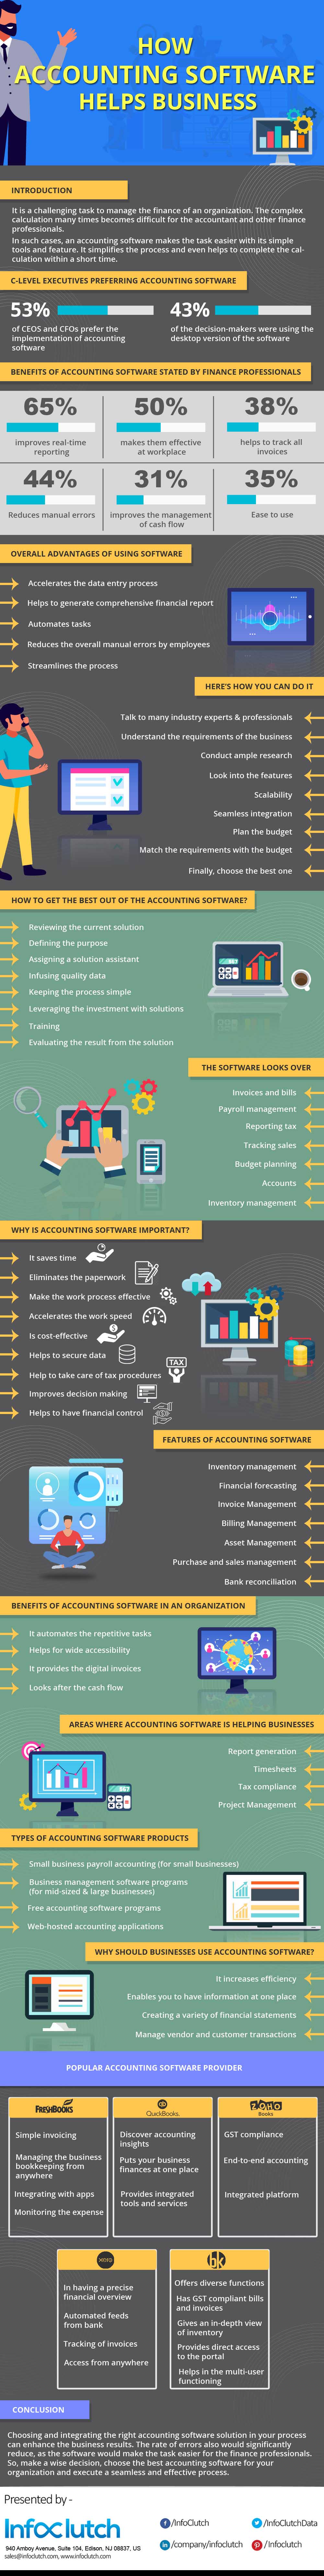 How Accounting Software Helps Business